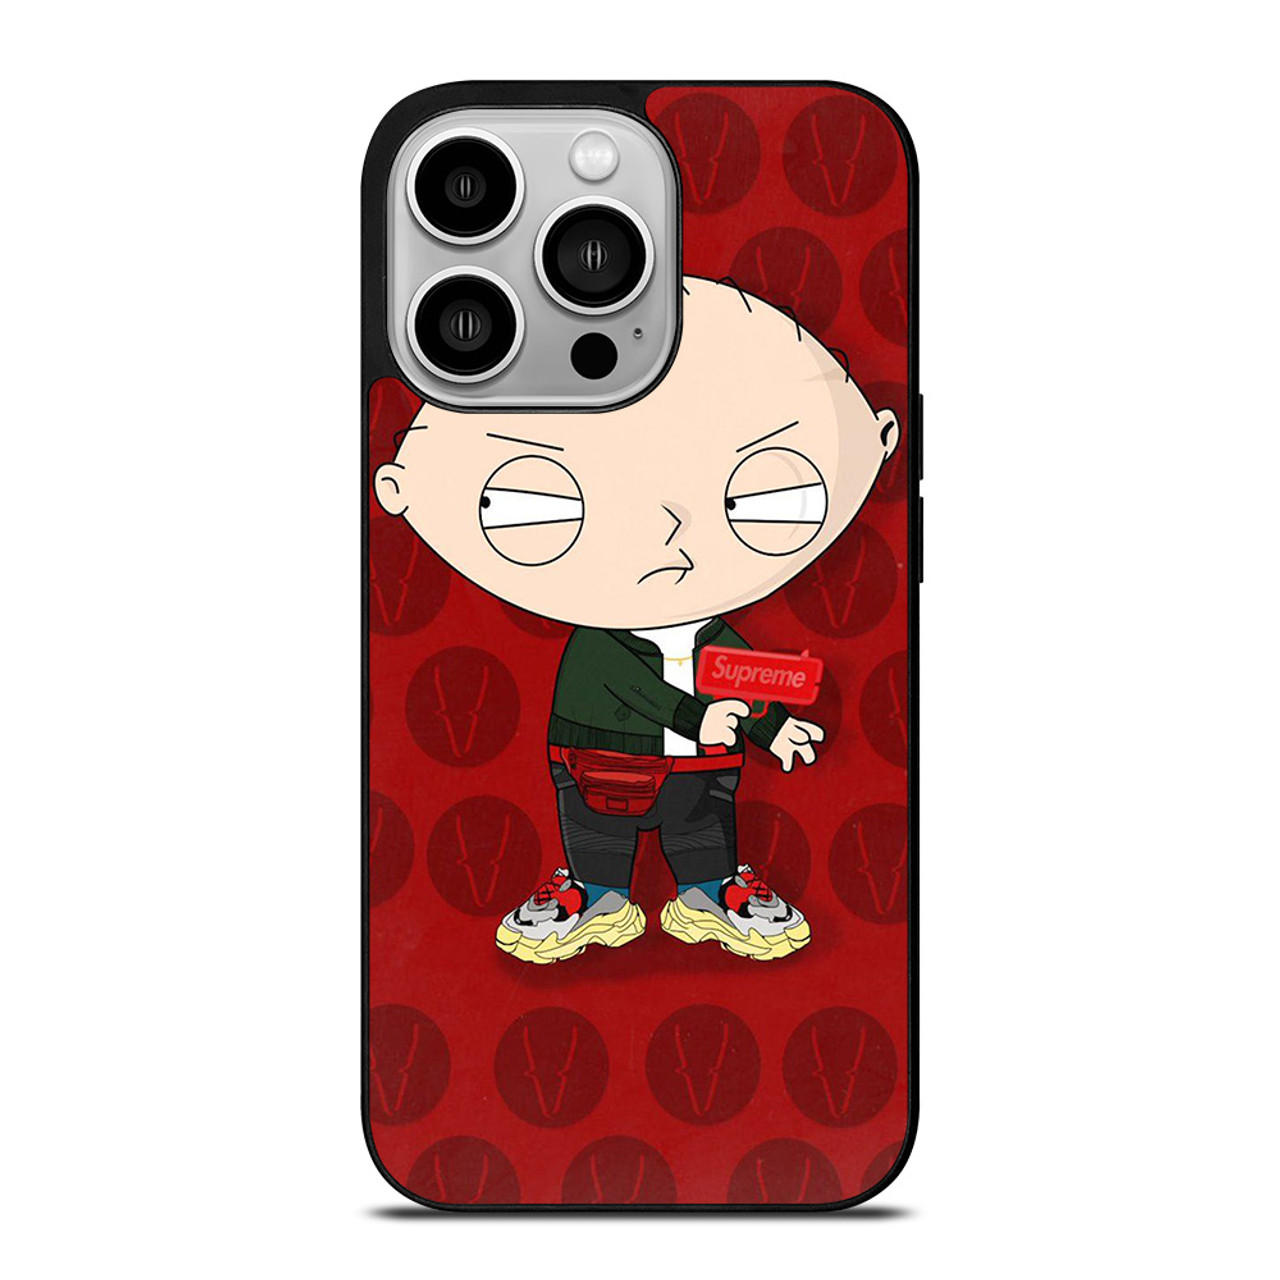 SUPREME GRIFFIN FAMILY GUY iPhone 14 Pro Case Cover